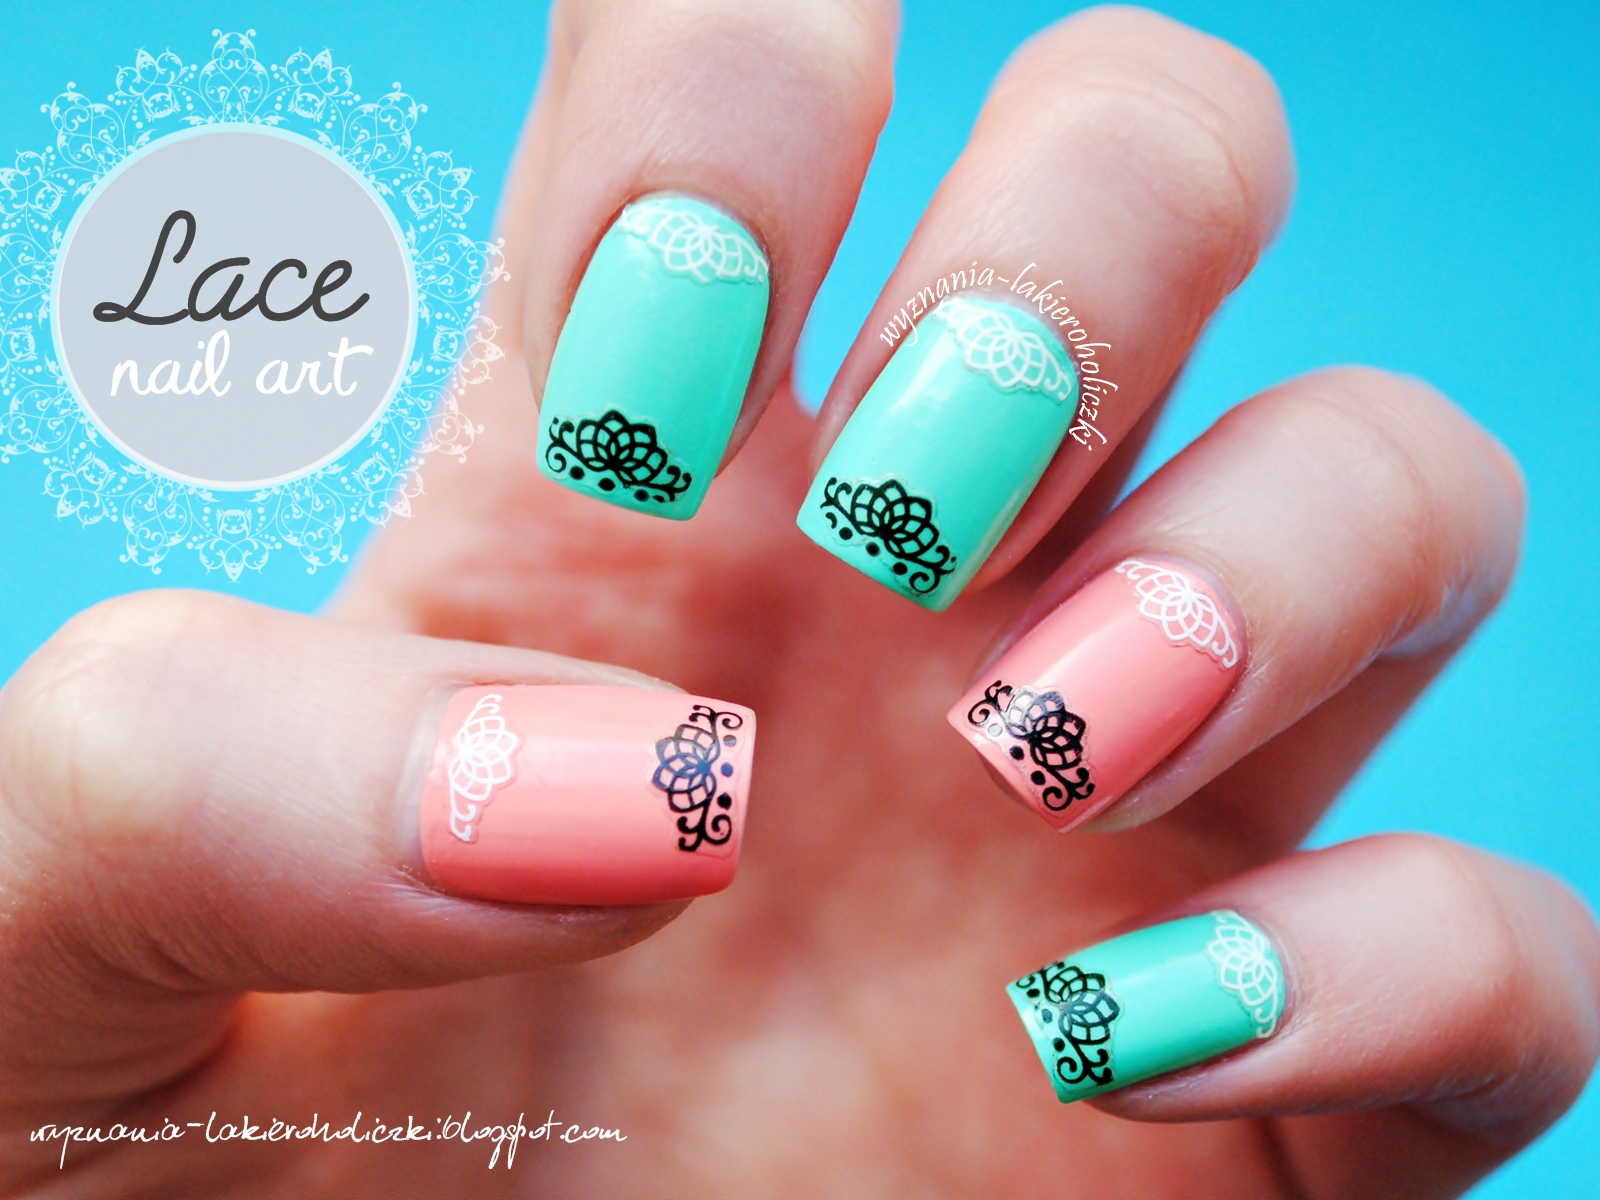 1. Lace Nail Art Designs on Pinterest - wide 8